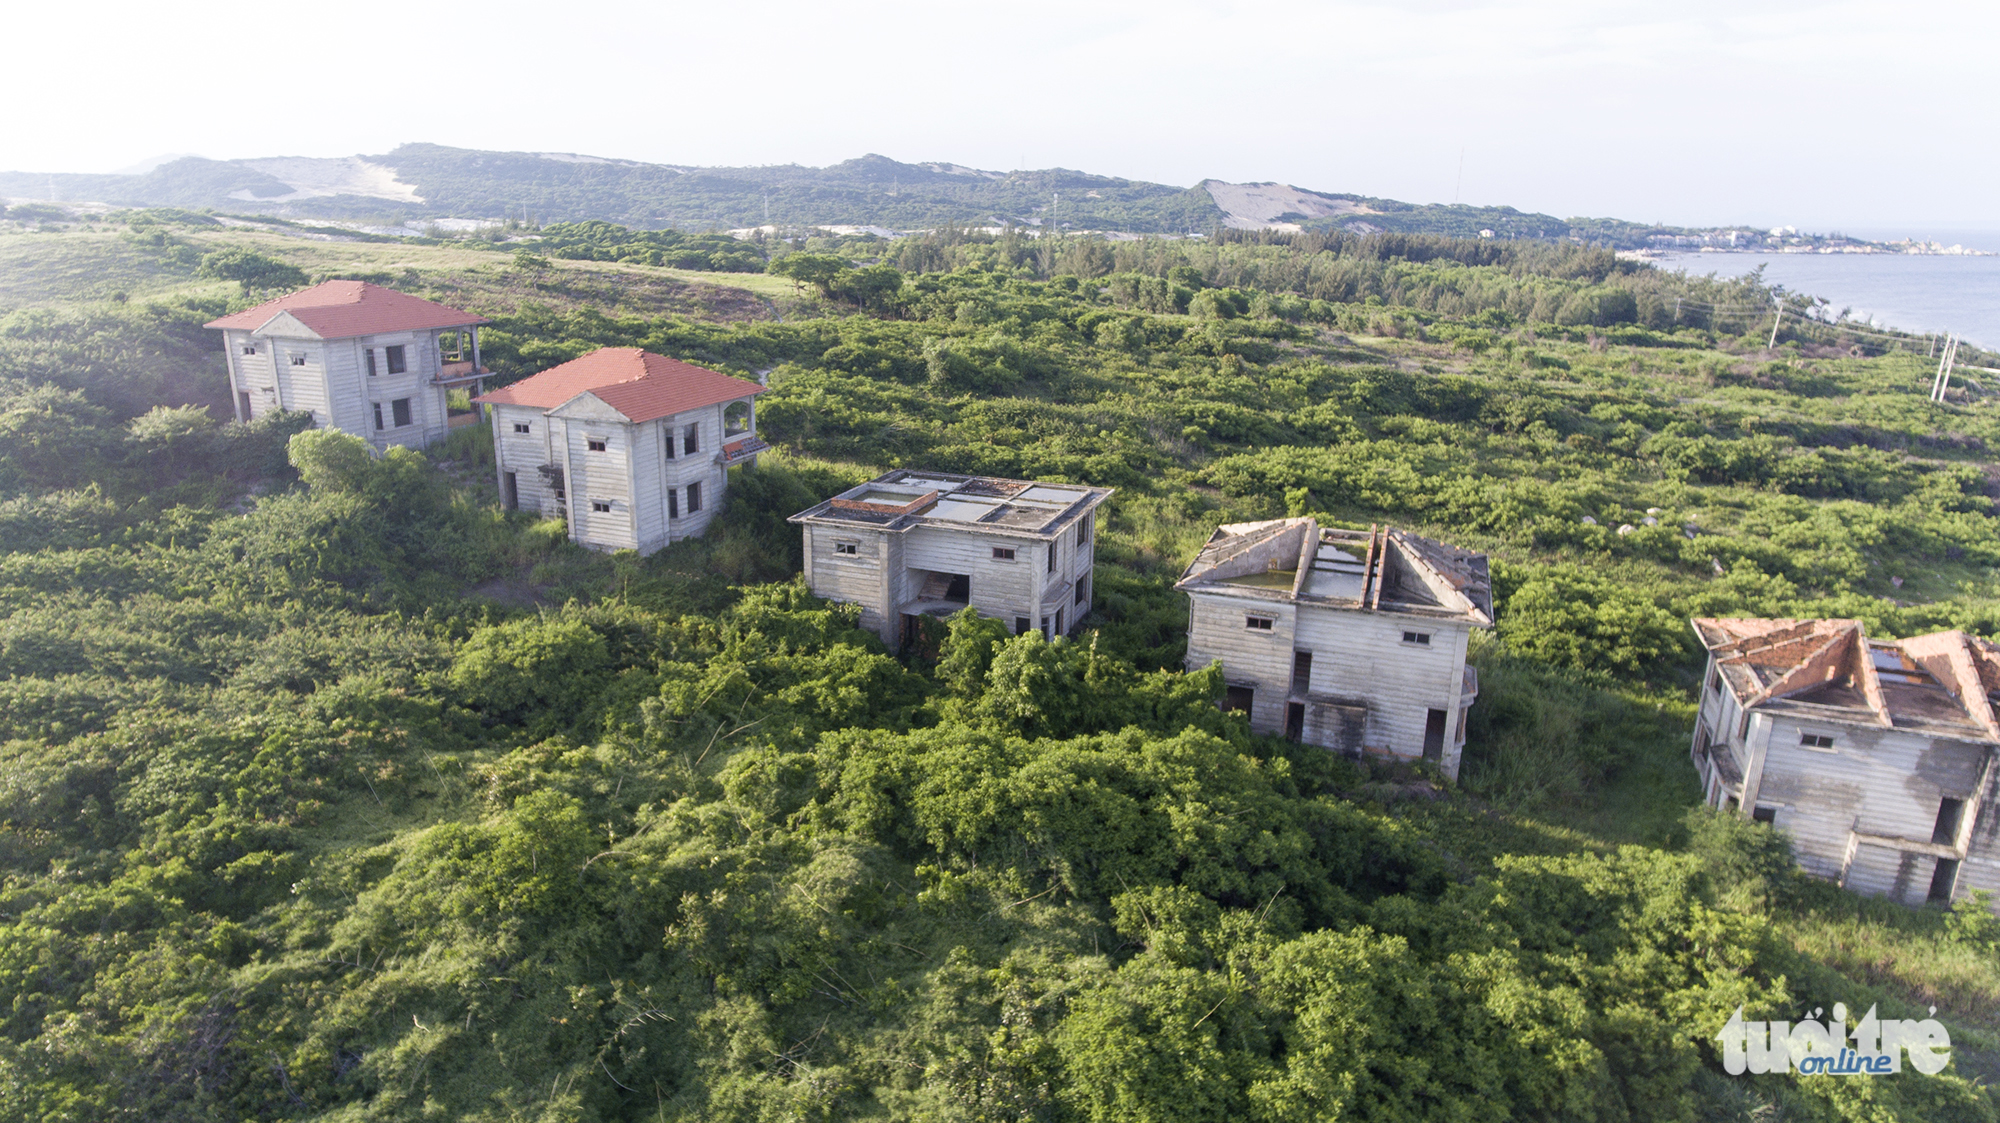 A tourist project in Binh Thuan Province is left unfinished due to the impact of local titanium mines. Photo: Tuoi Tre